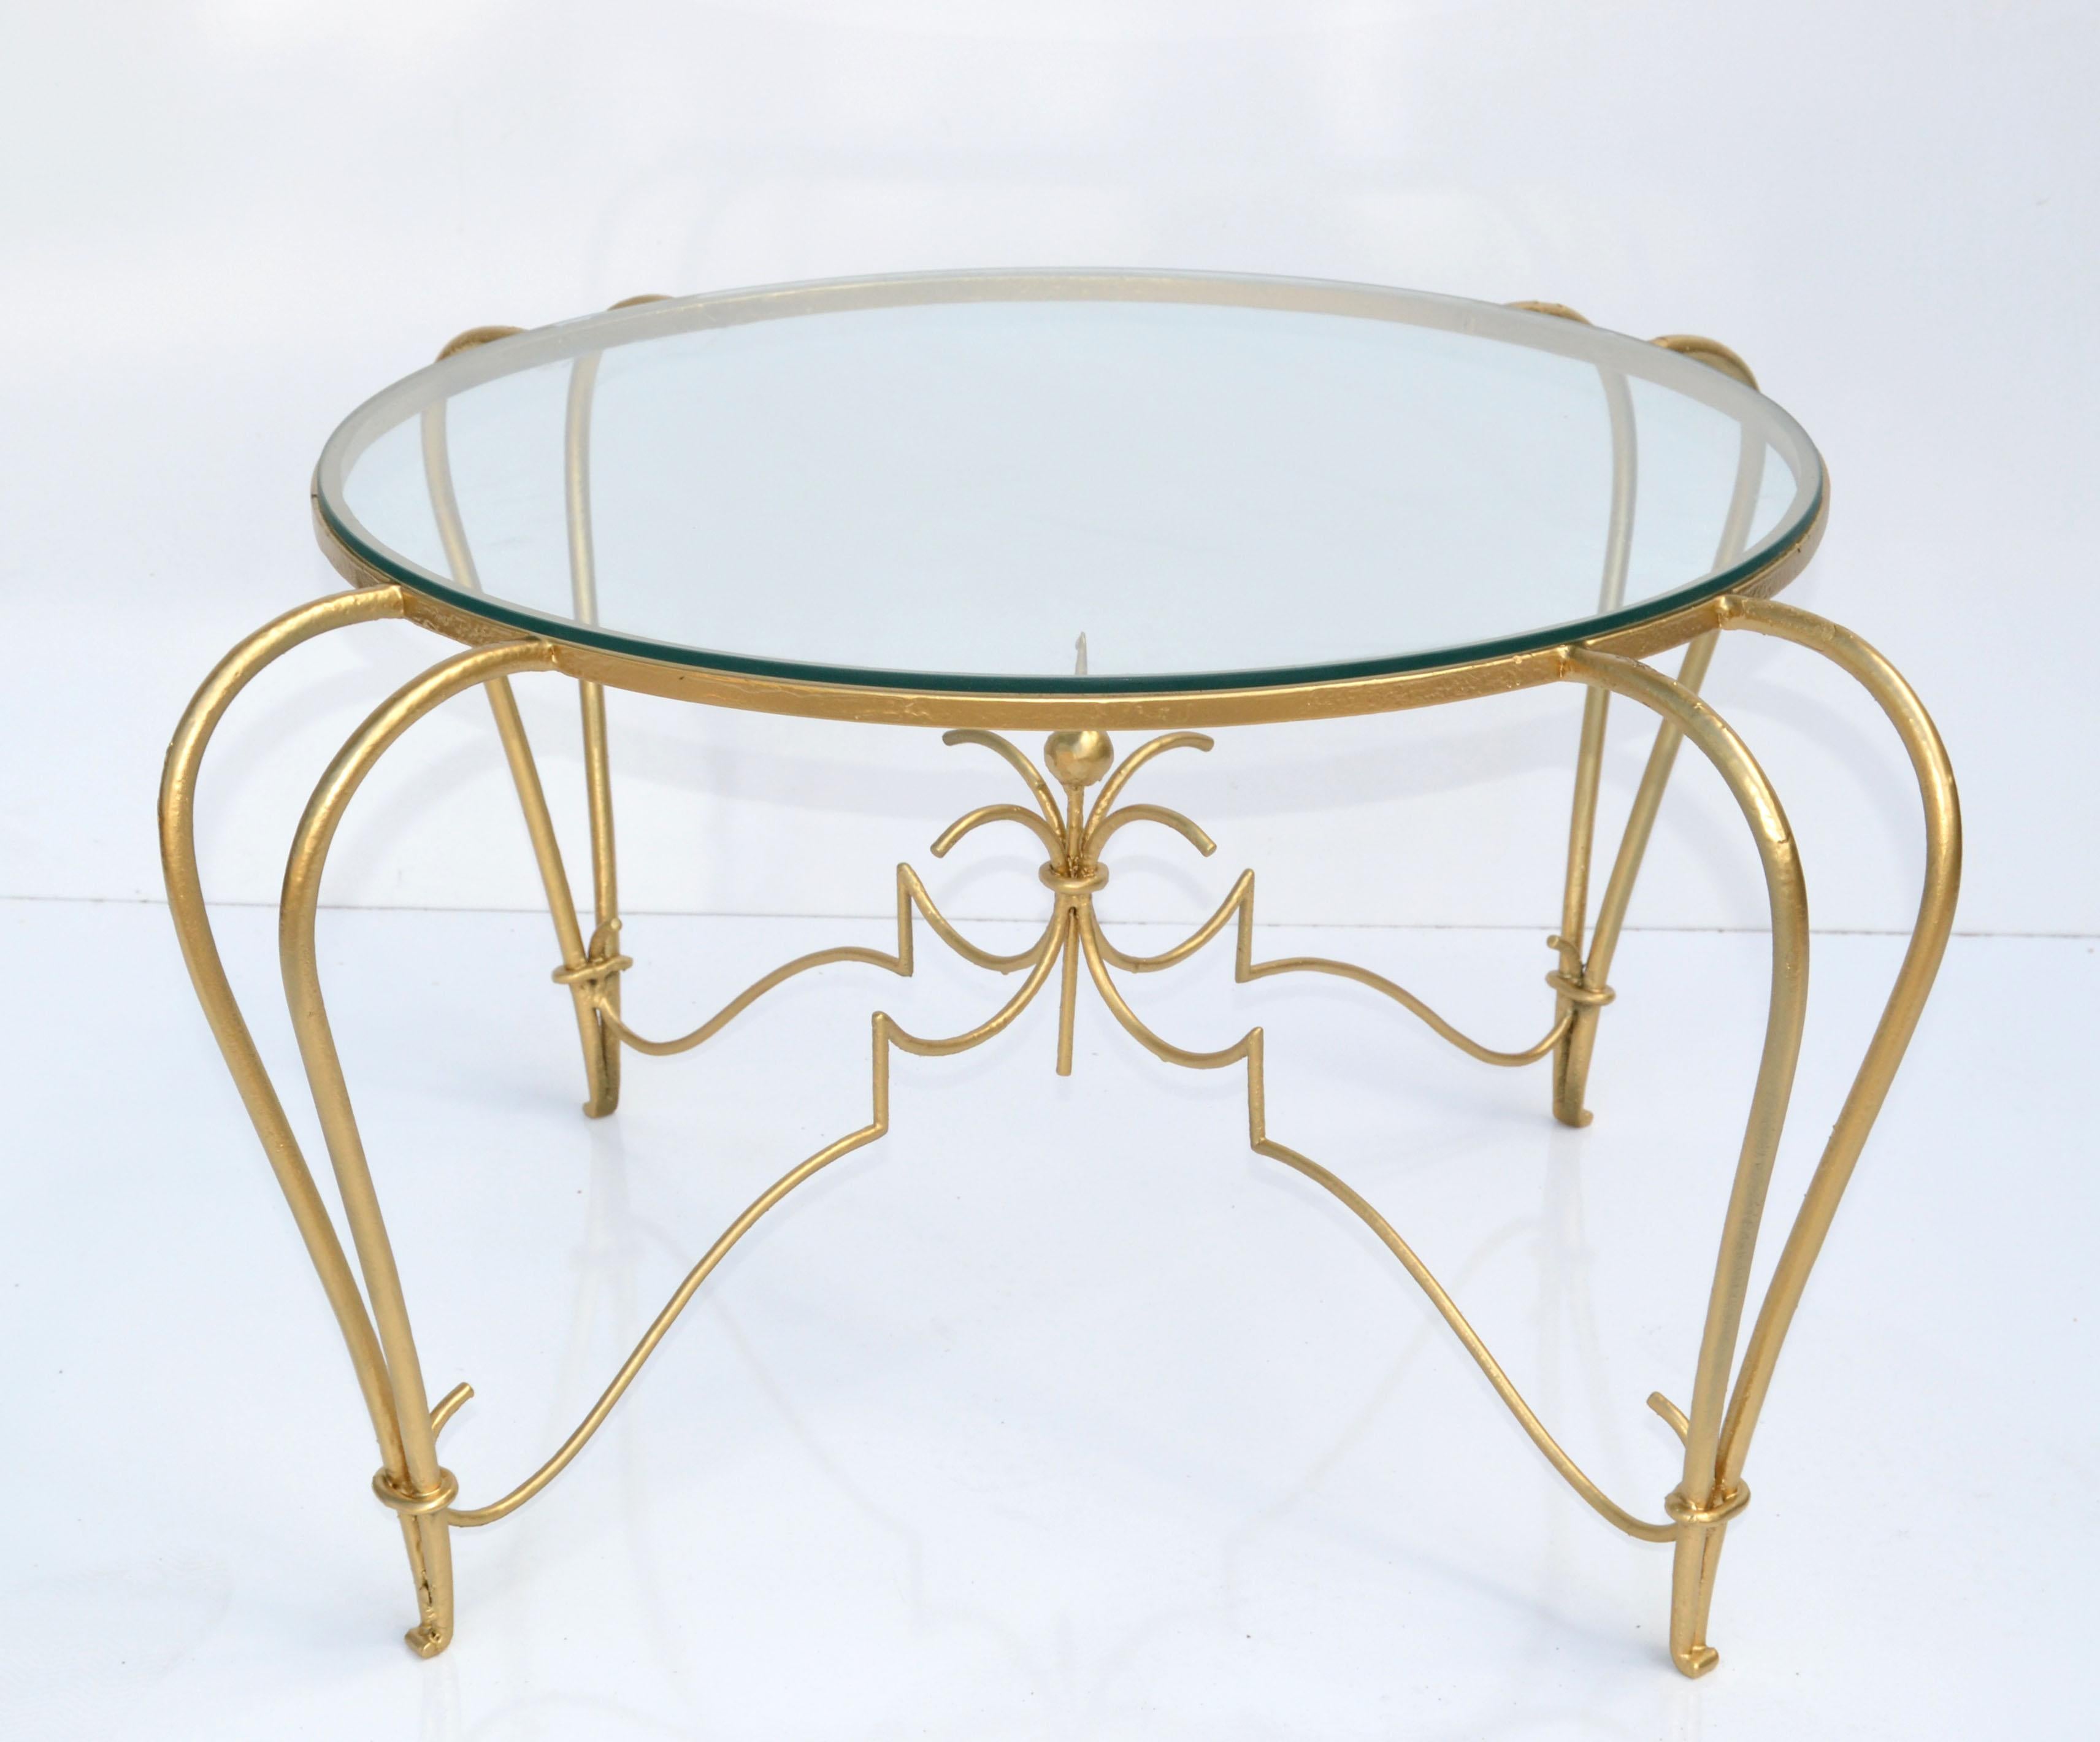 Art Deco Gold Finish Round Wrought Iron & Glass Top Cocktail Table, France, 1950 For Sale 4